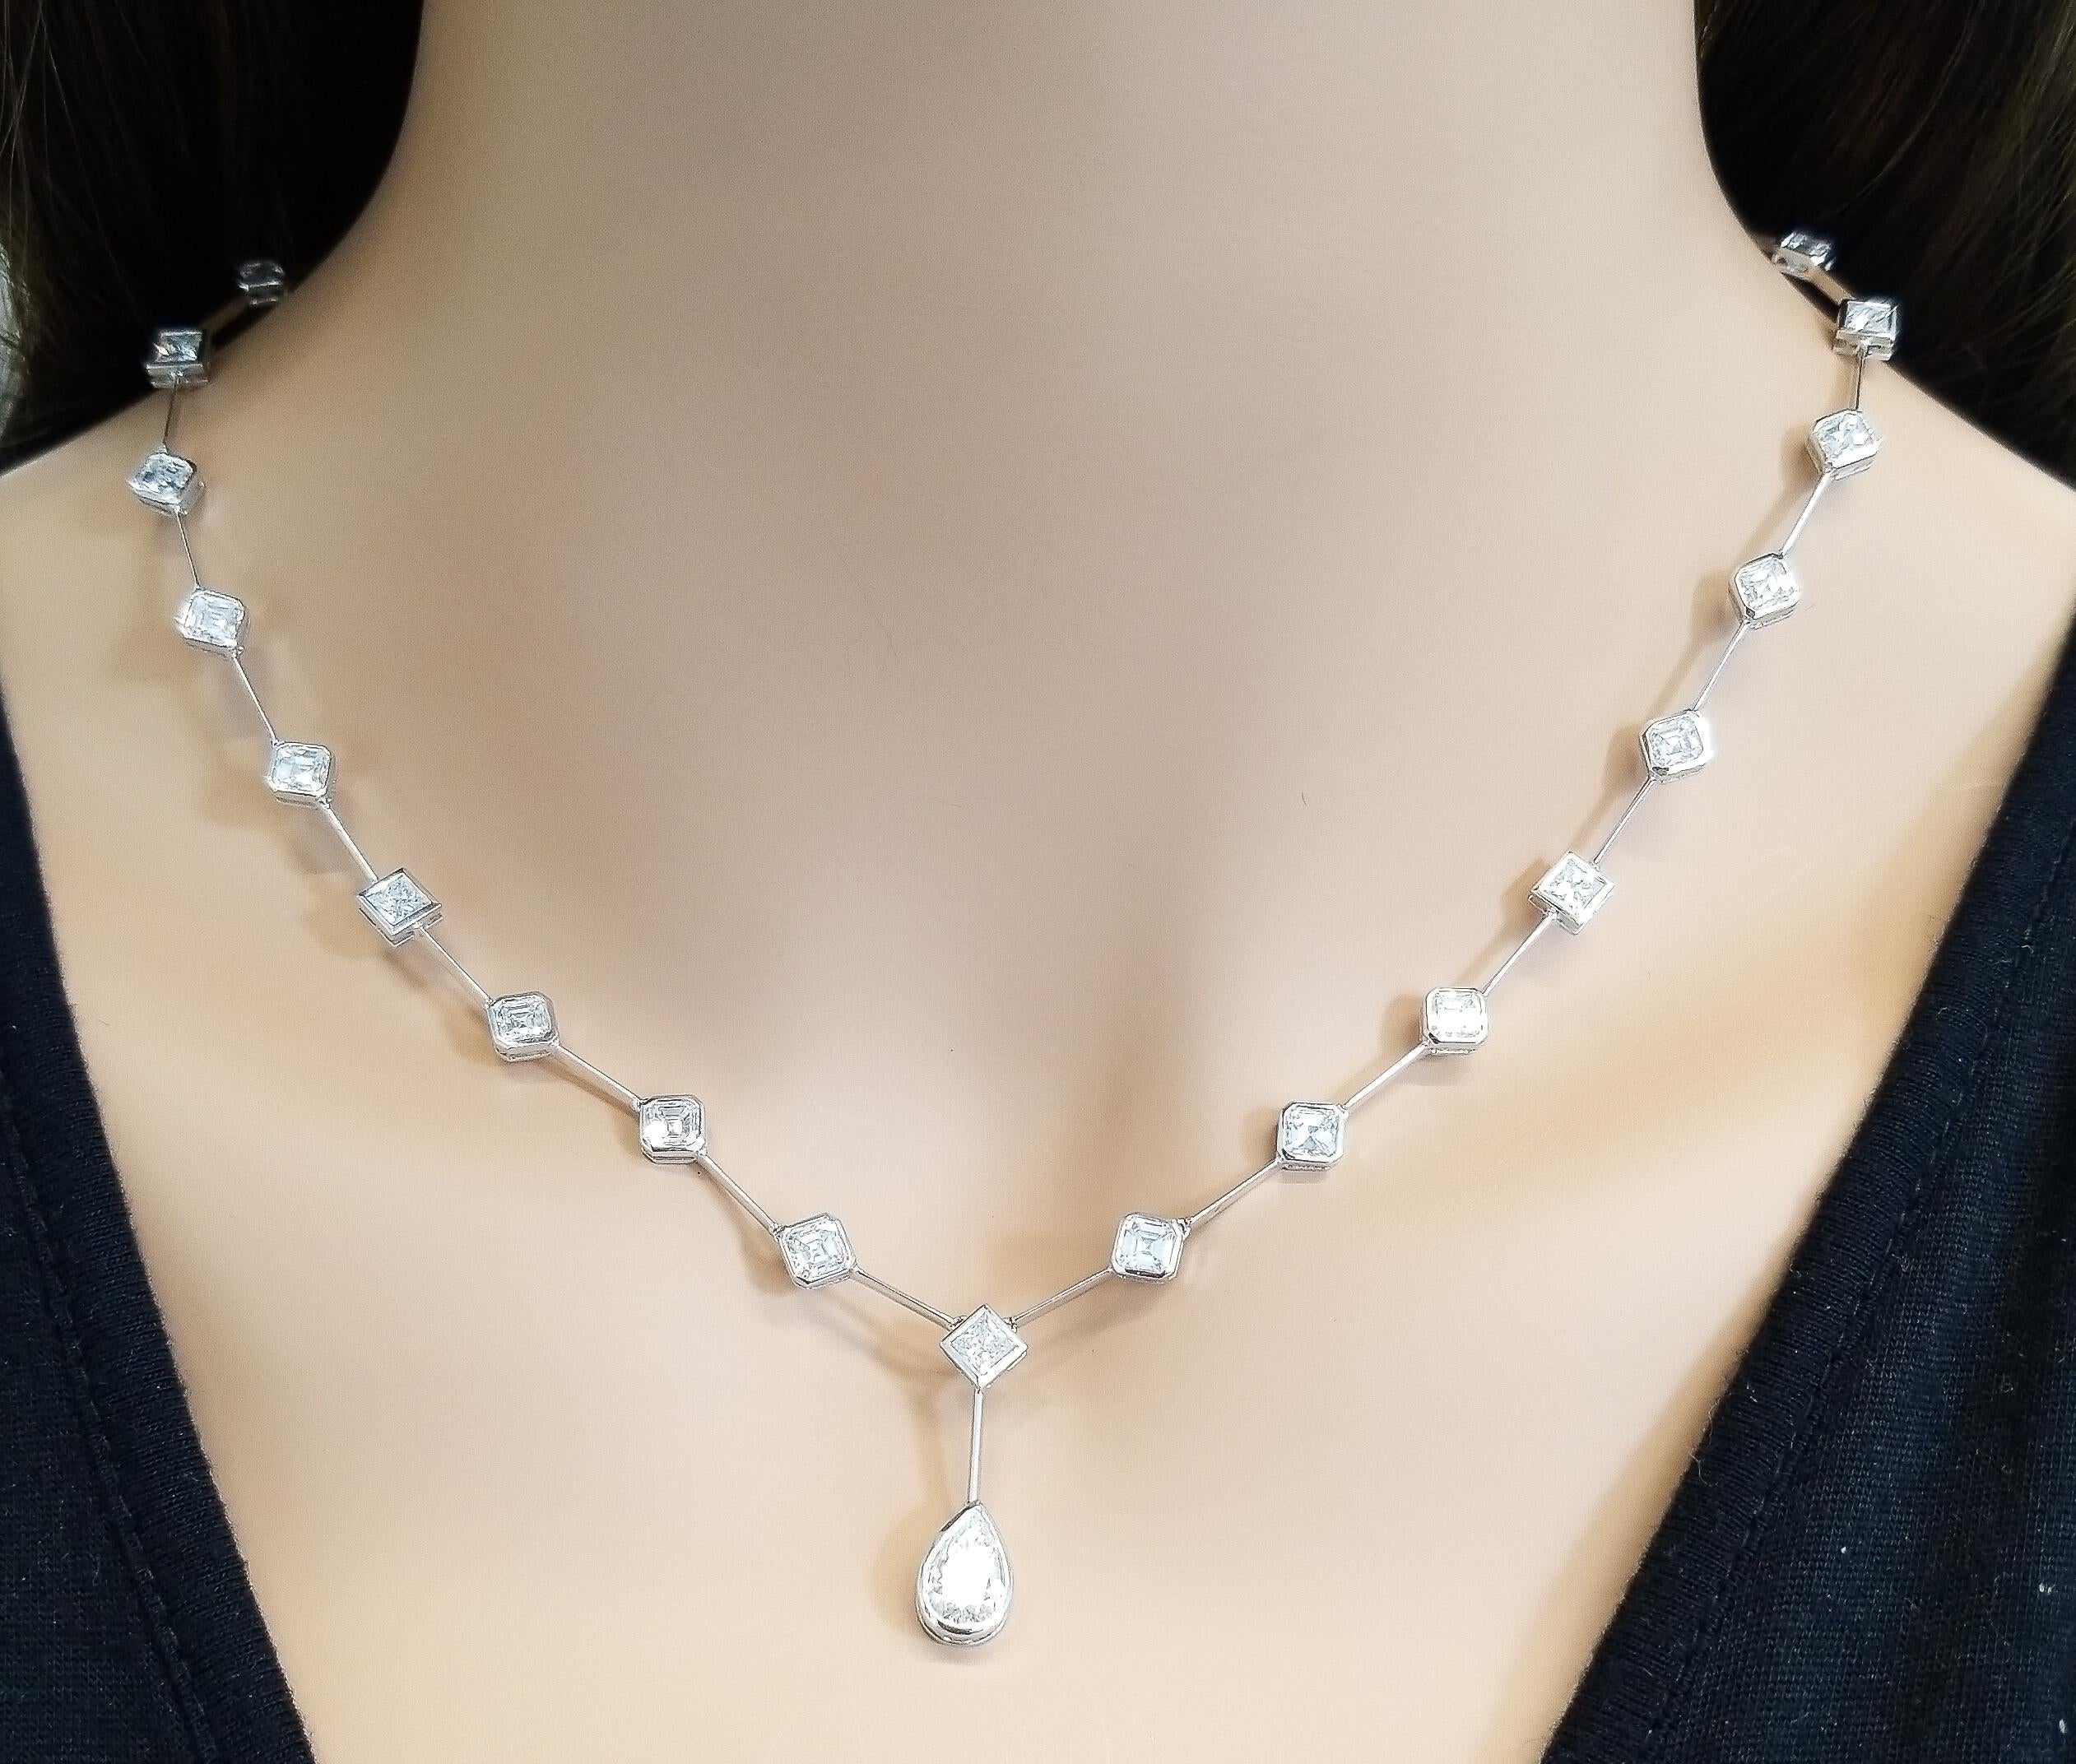 Daring geometric shapes adorn this handmade station necklace. The first aspect you’ll notice is the sparkling 1.17 carat pear shaped diamond that drops from the center. You’ll also be delighted by the 2.15 carat total princess cut diamonds, and the